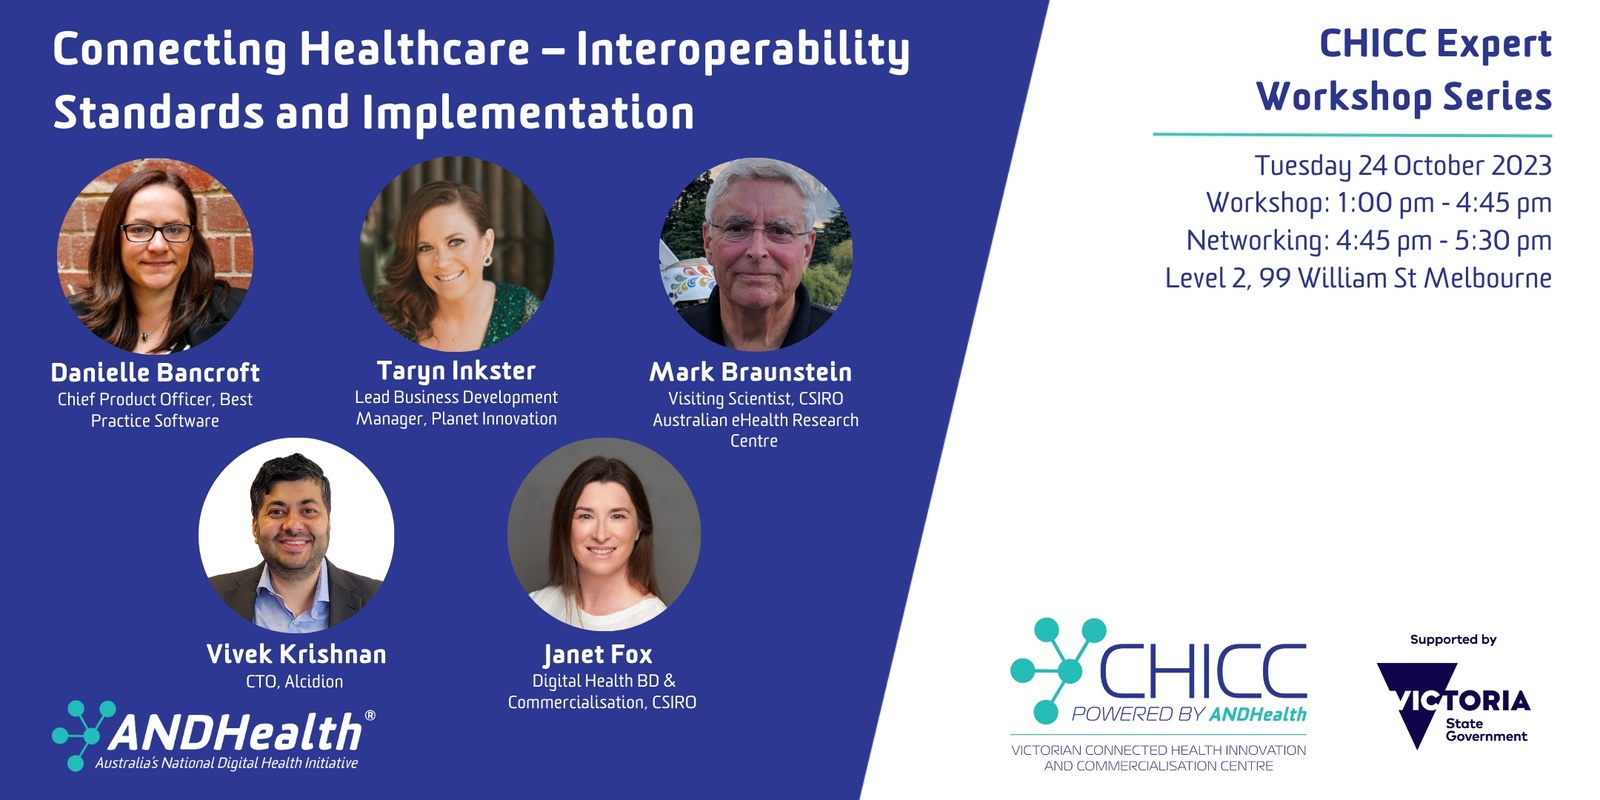 Banner image for CHICC Expert Workshop: Connecting Healthcare - Interoperability Standards and Implementation